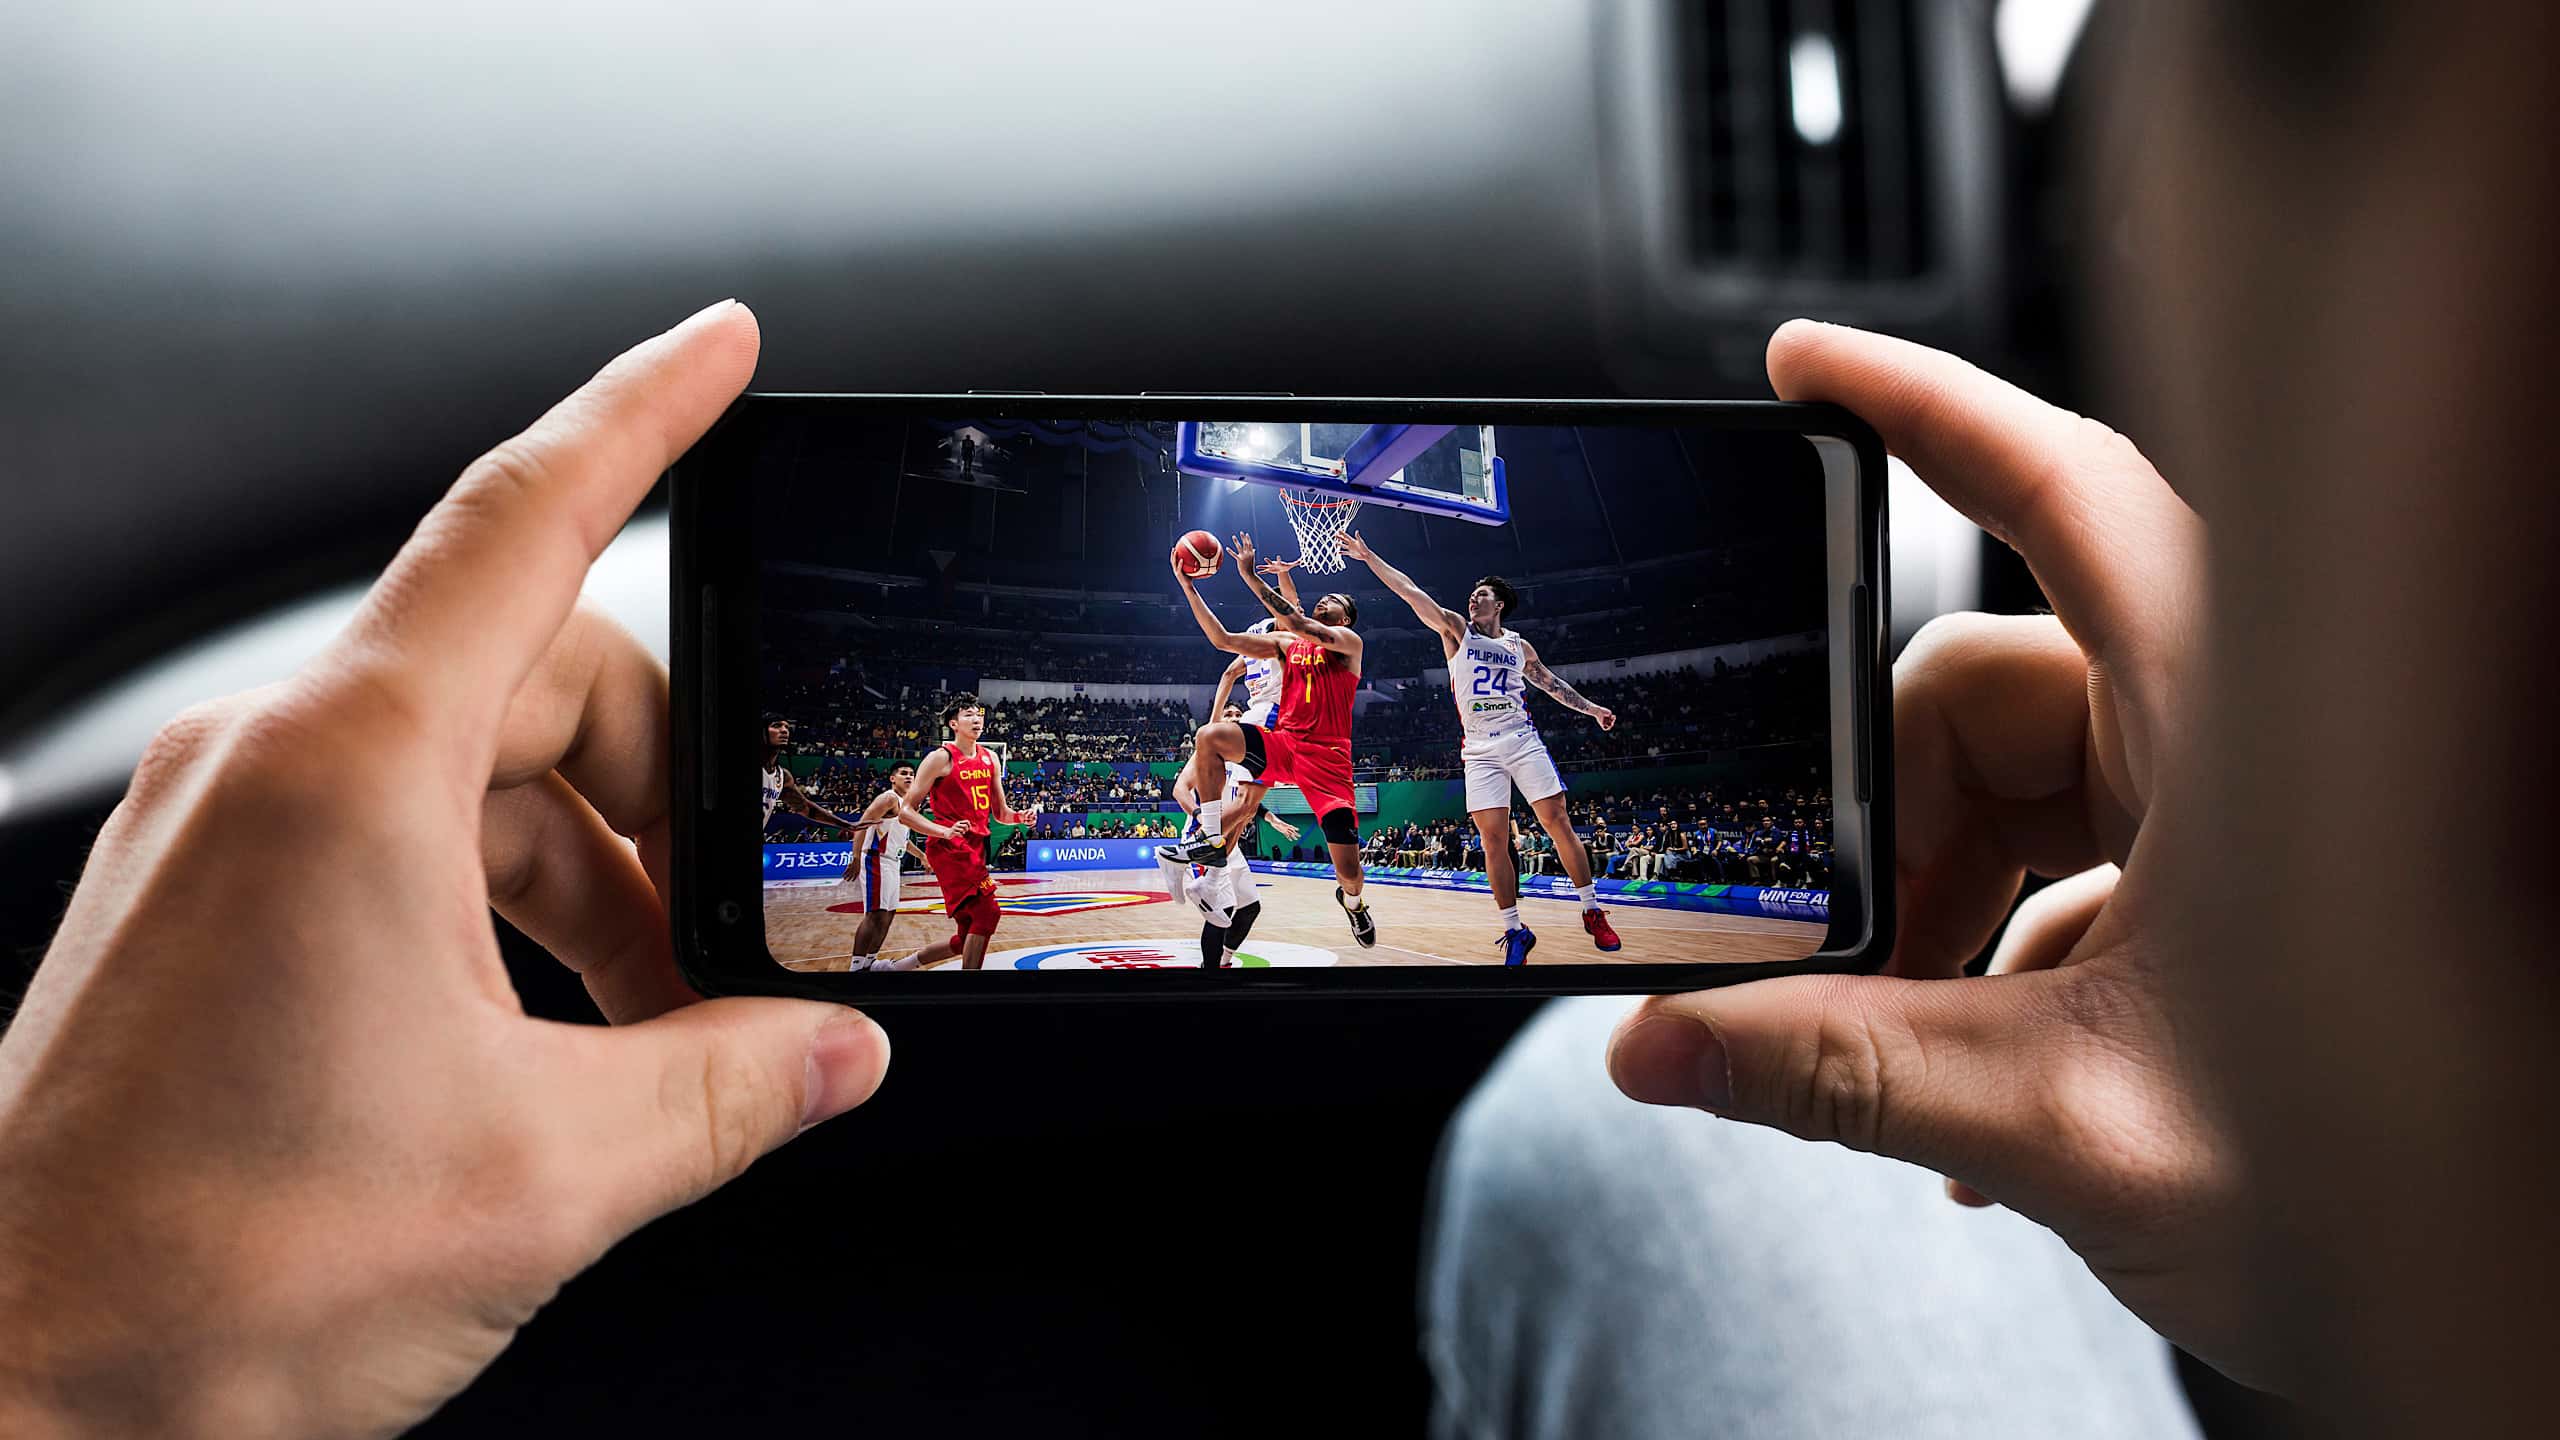 Smart made the the 2023 FIBA World Cup streaming available for its subscribers